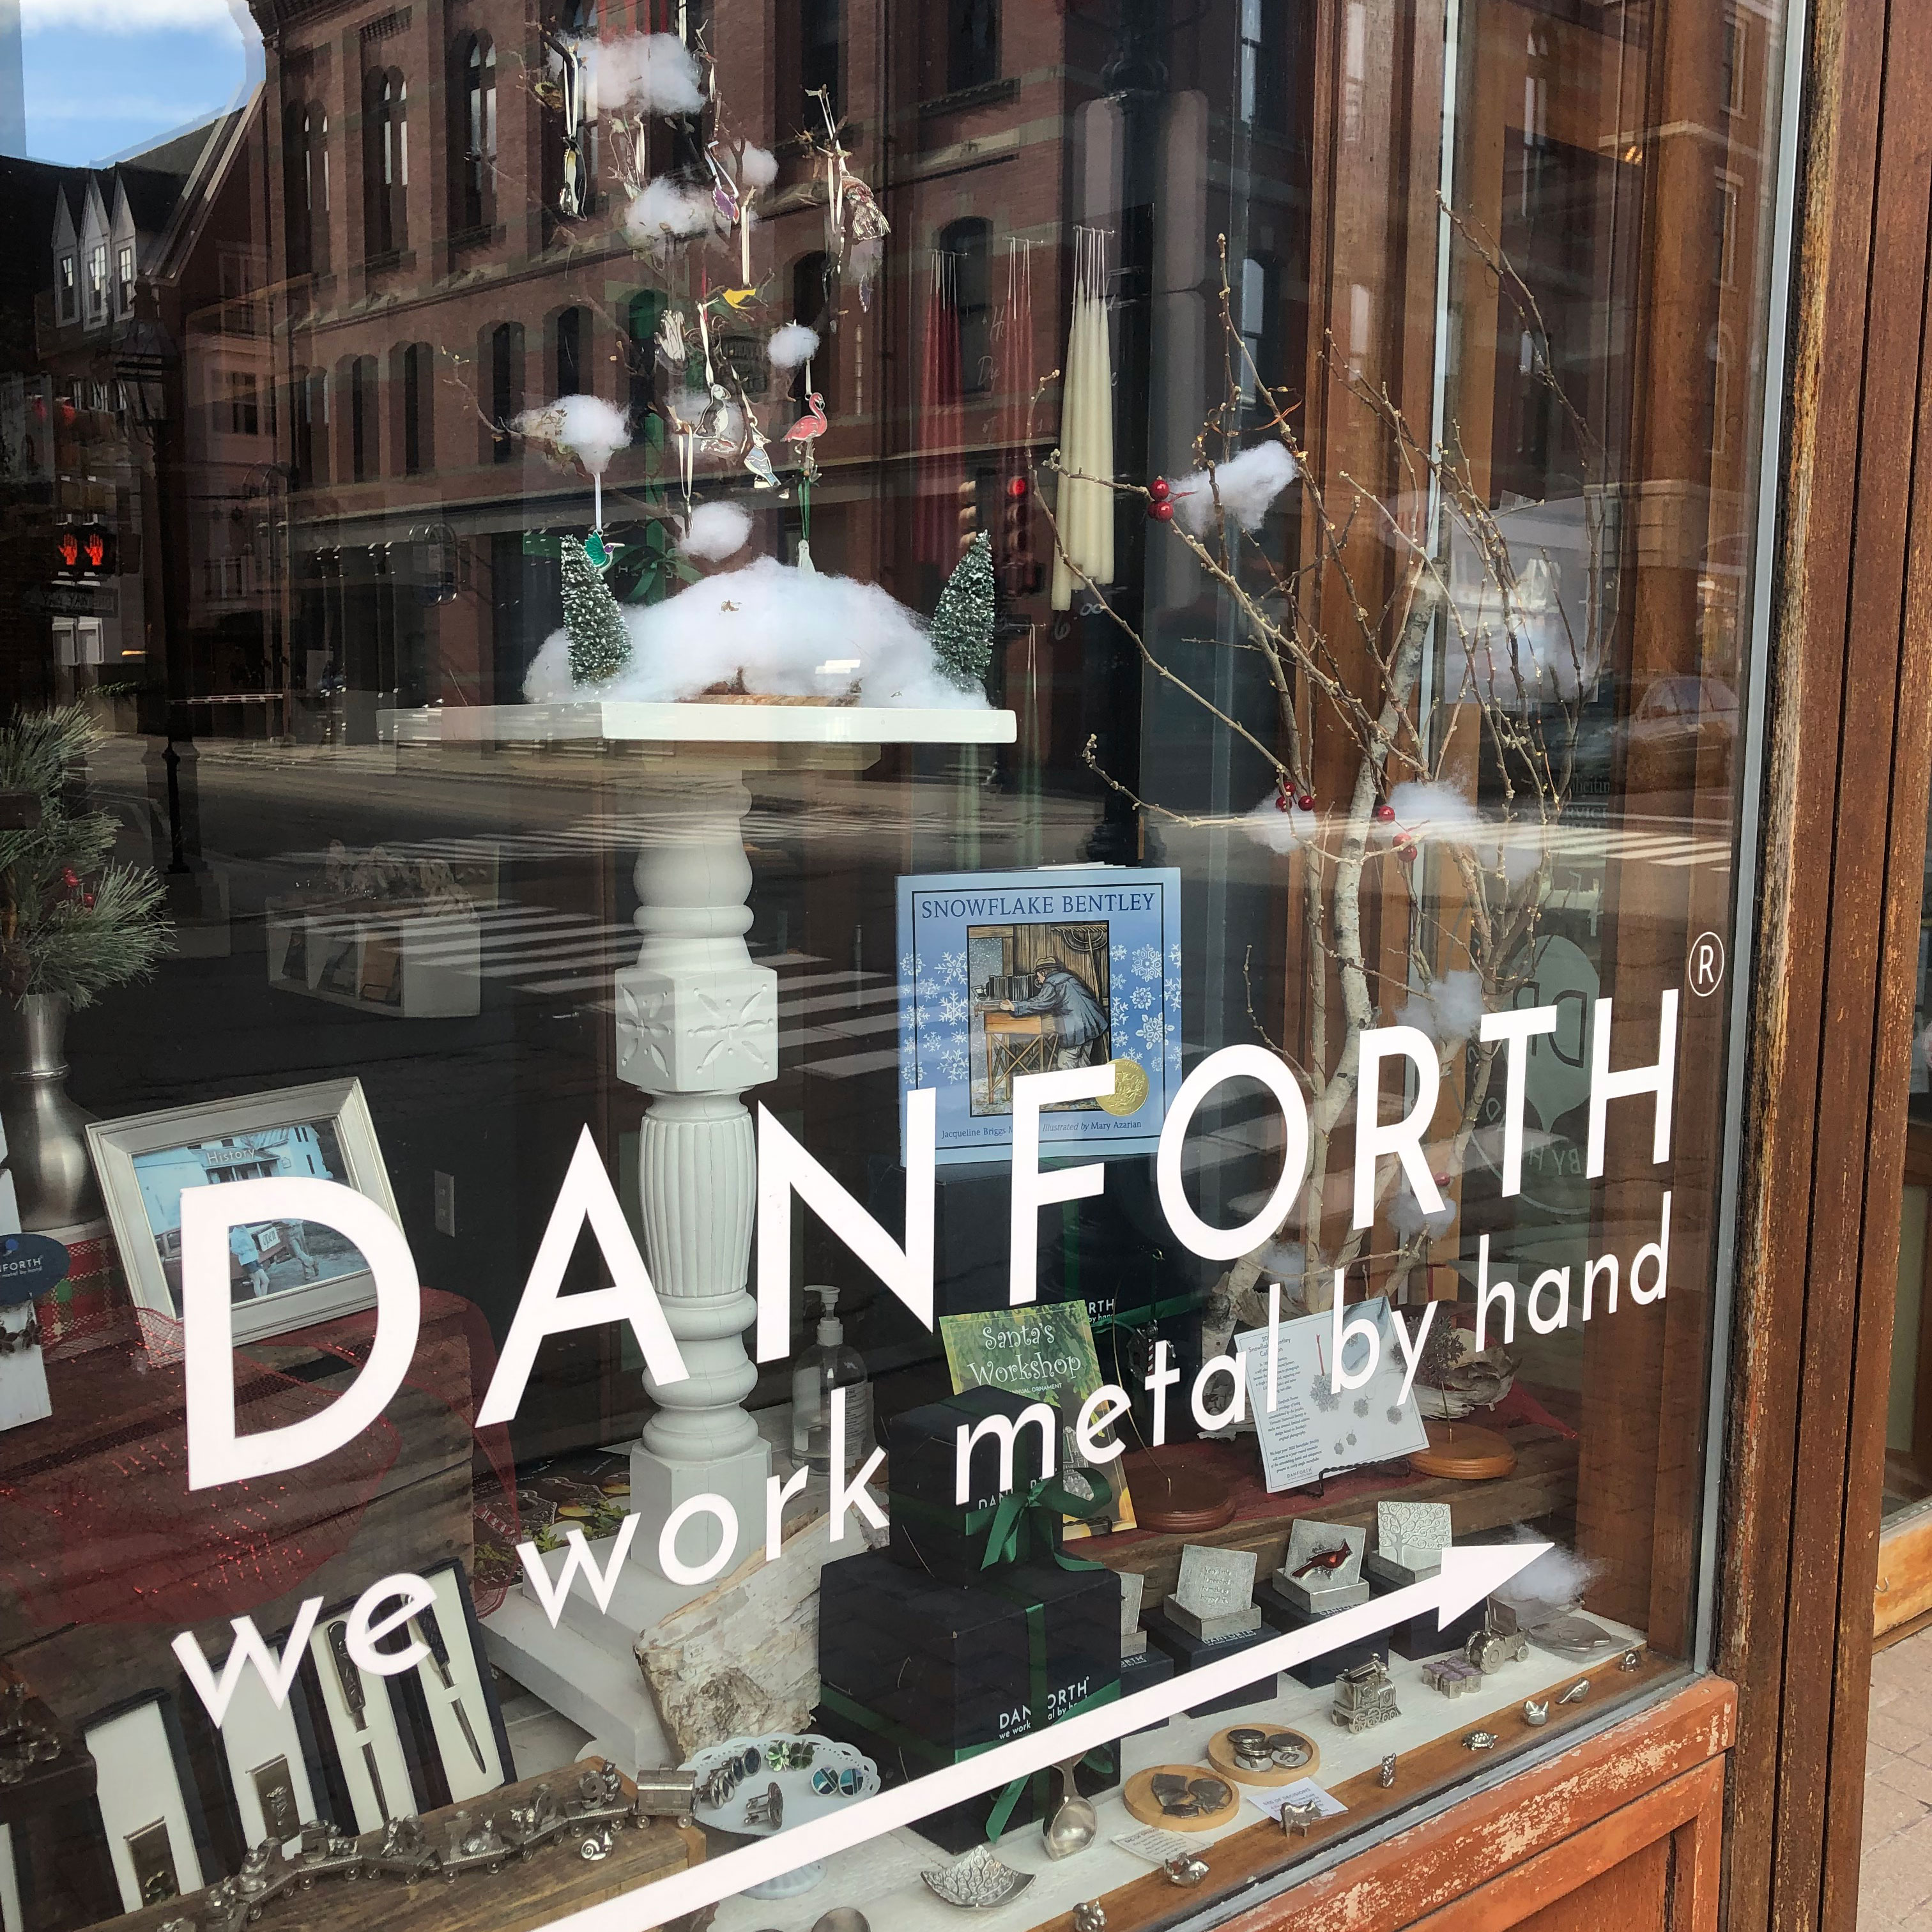 Danforth Pewter storefront looking in through the glass